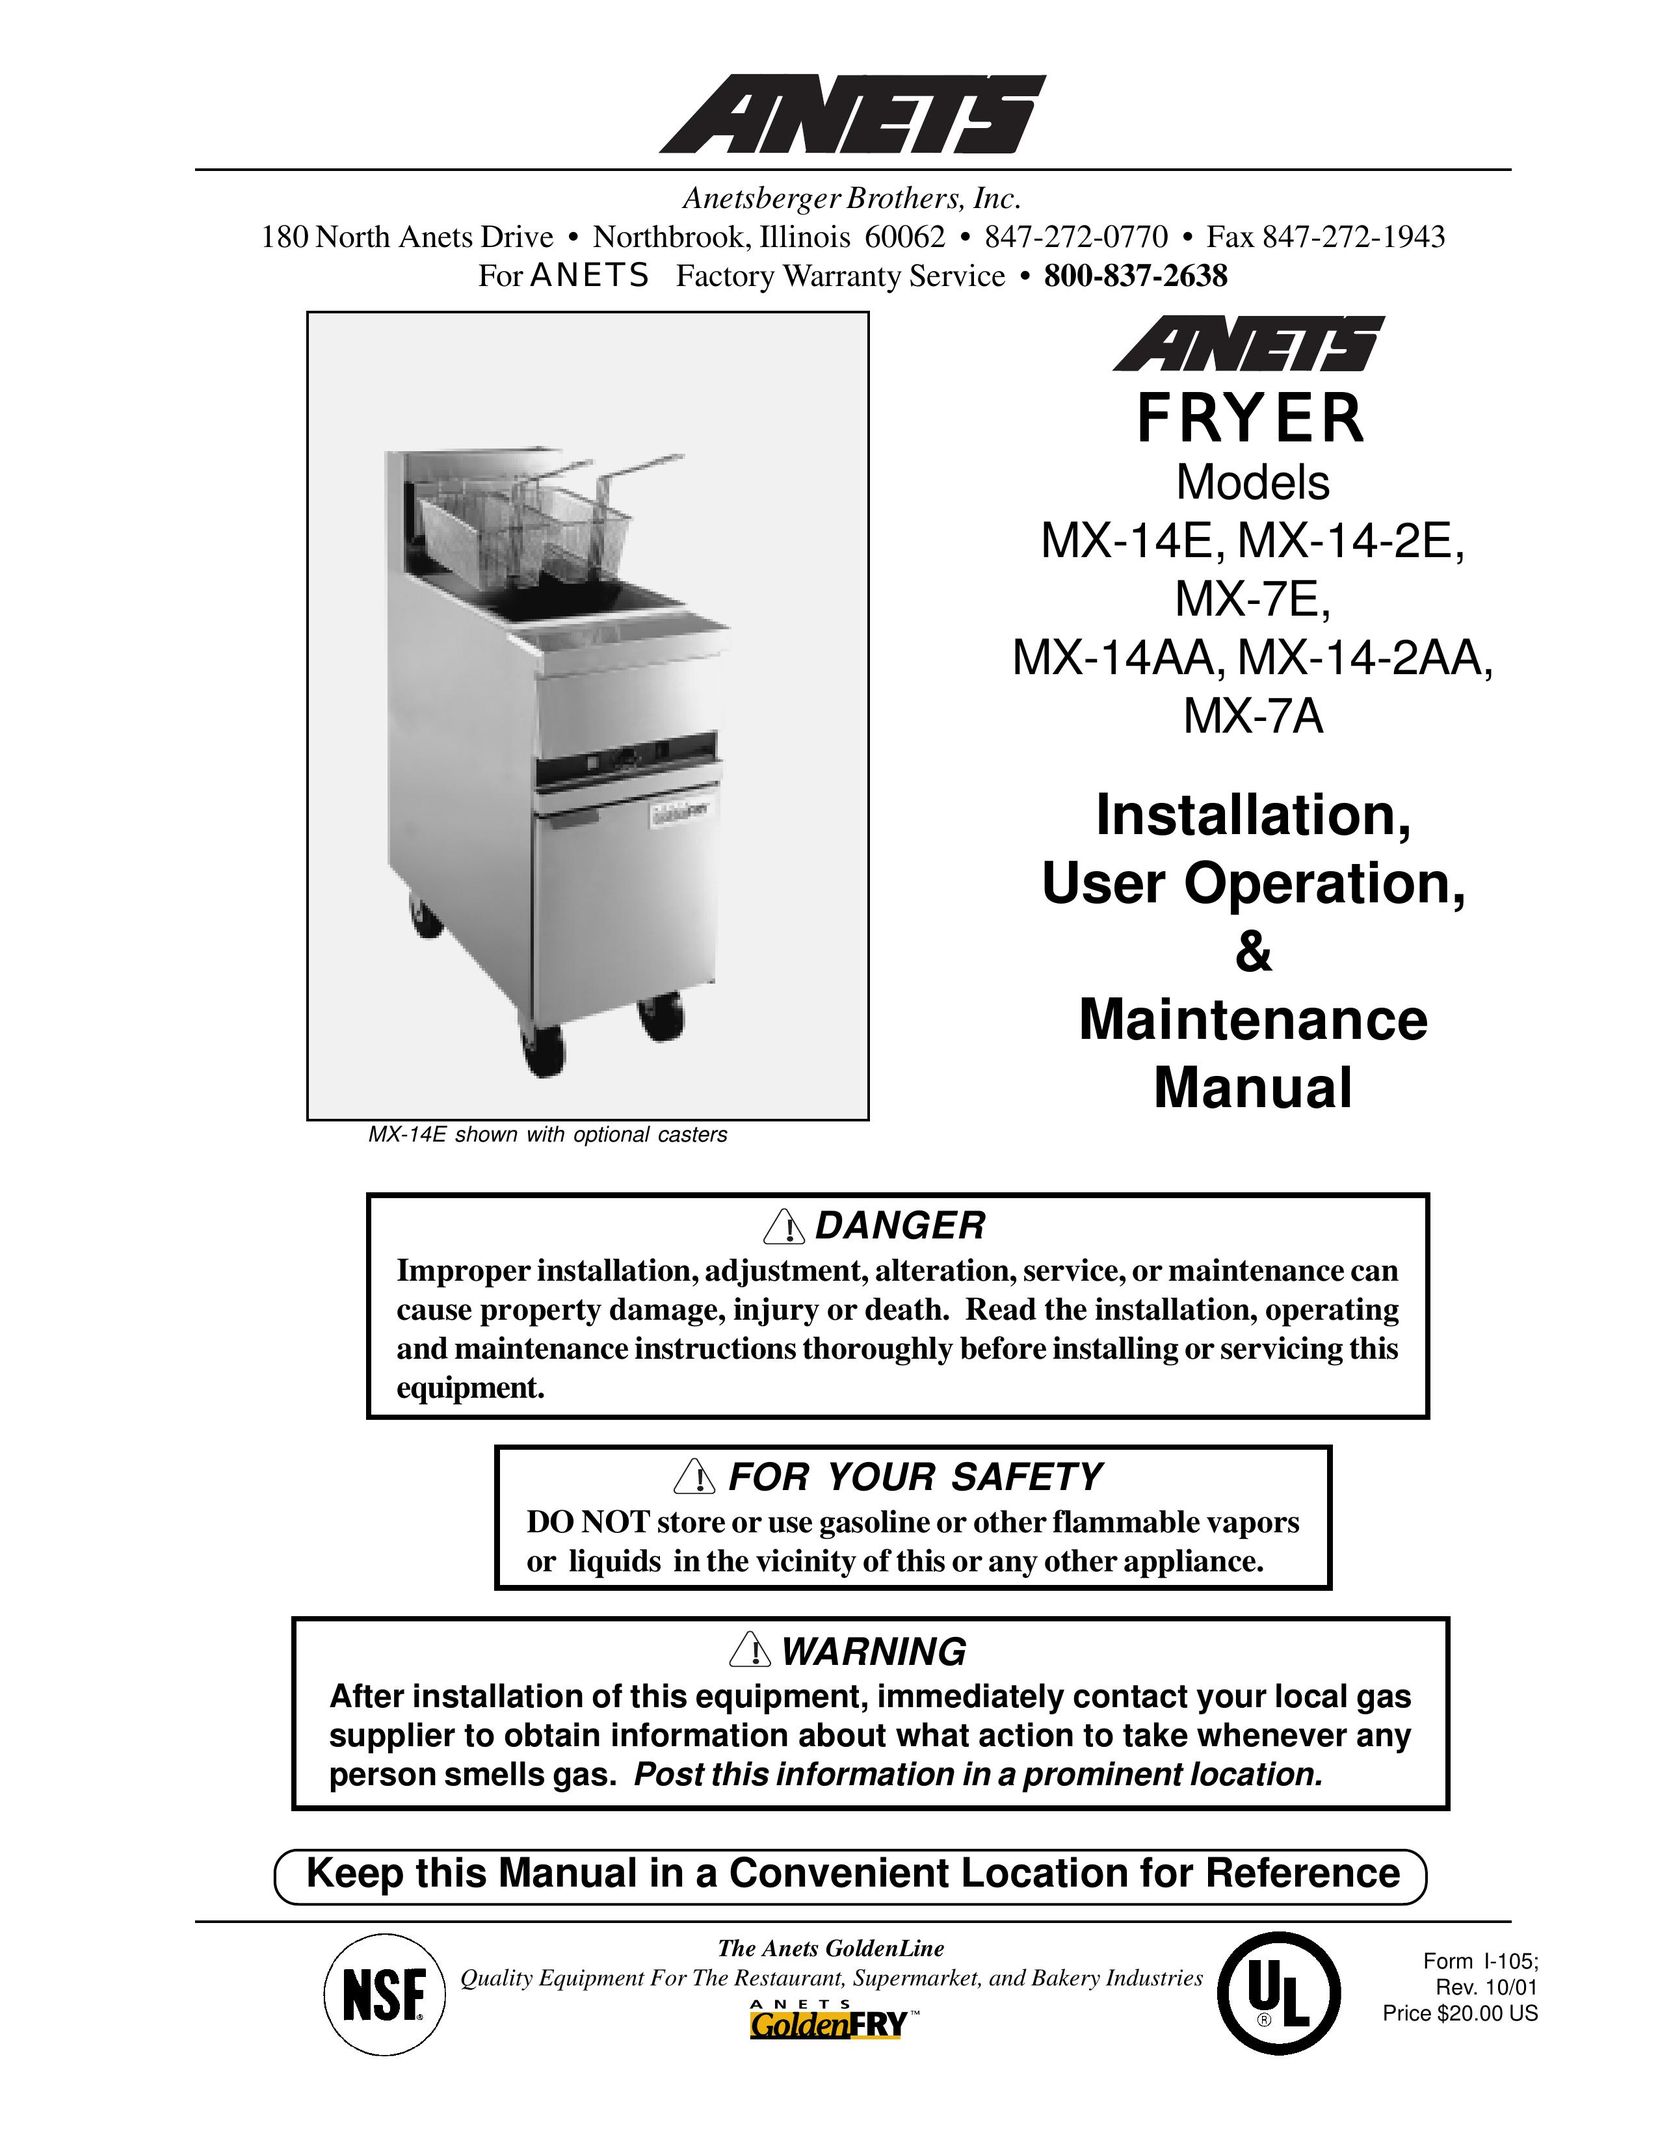 Anetsberger Brothers MX-14-2E Fryer User Manual